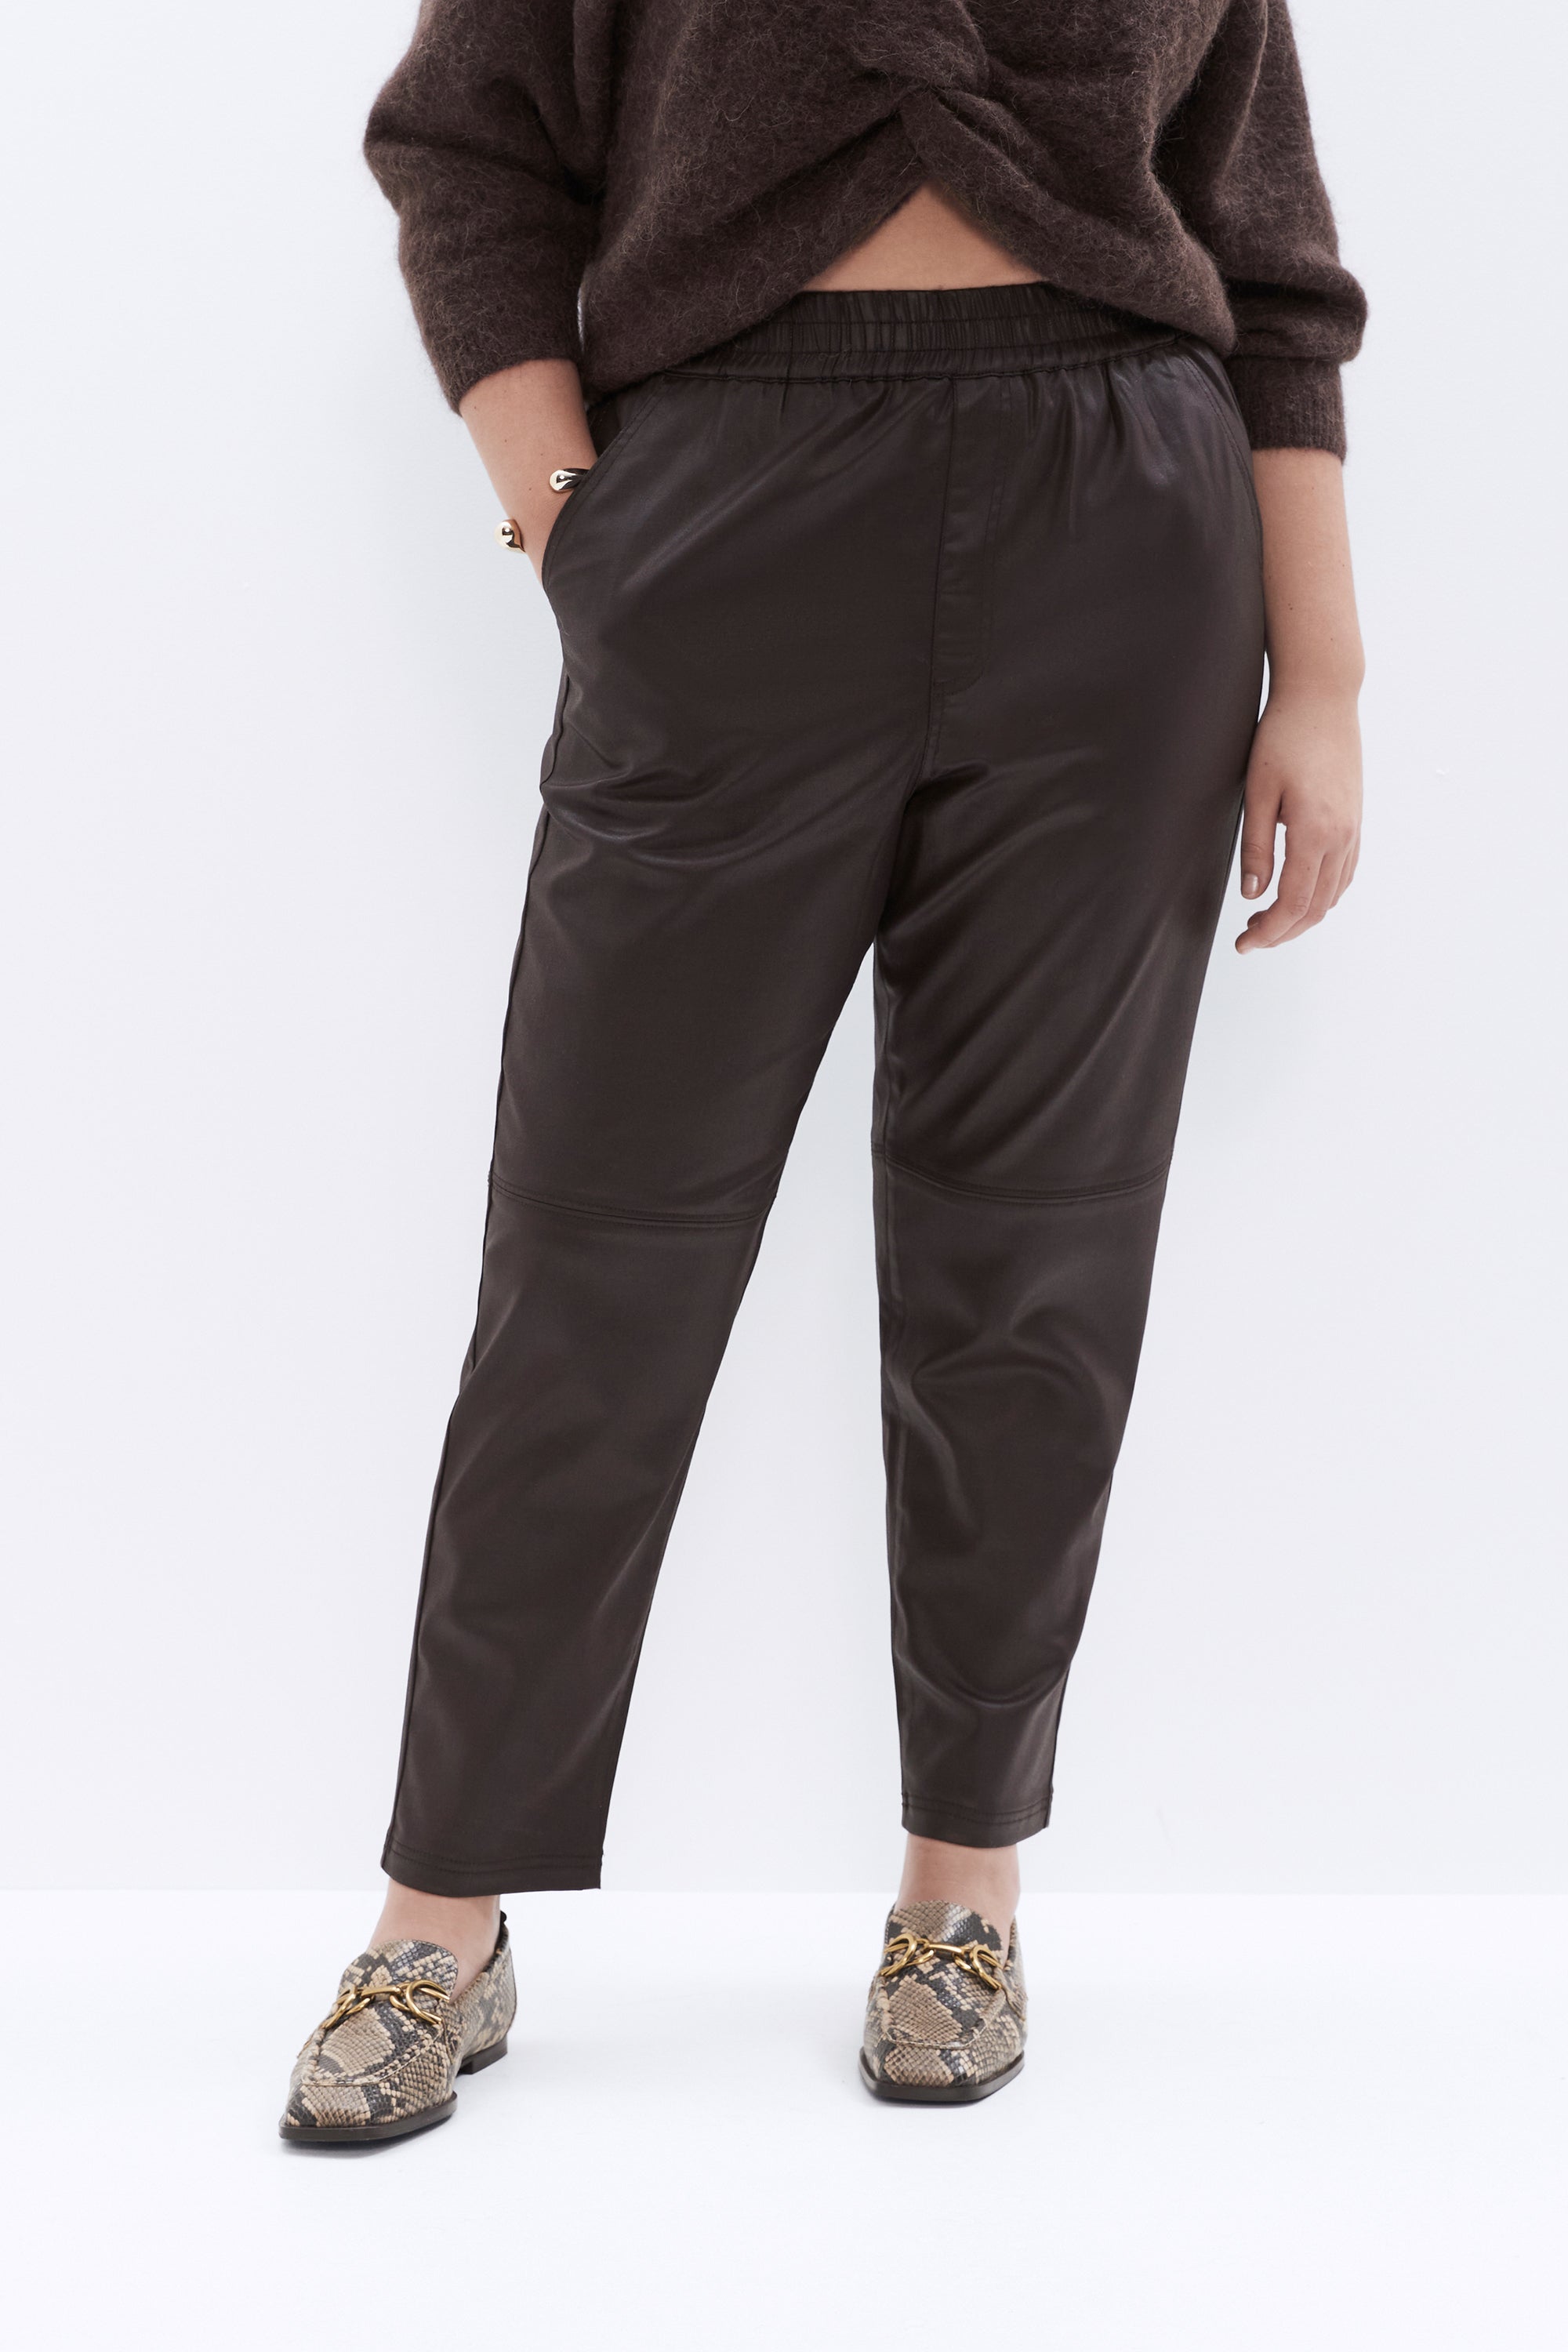 yardsong Womens Summer Pants Lightweight Casual Cotton Linen Trousers Wide  Leg Solid Color Ankle Pants with Pockets : : Clothing, Shoes 